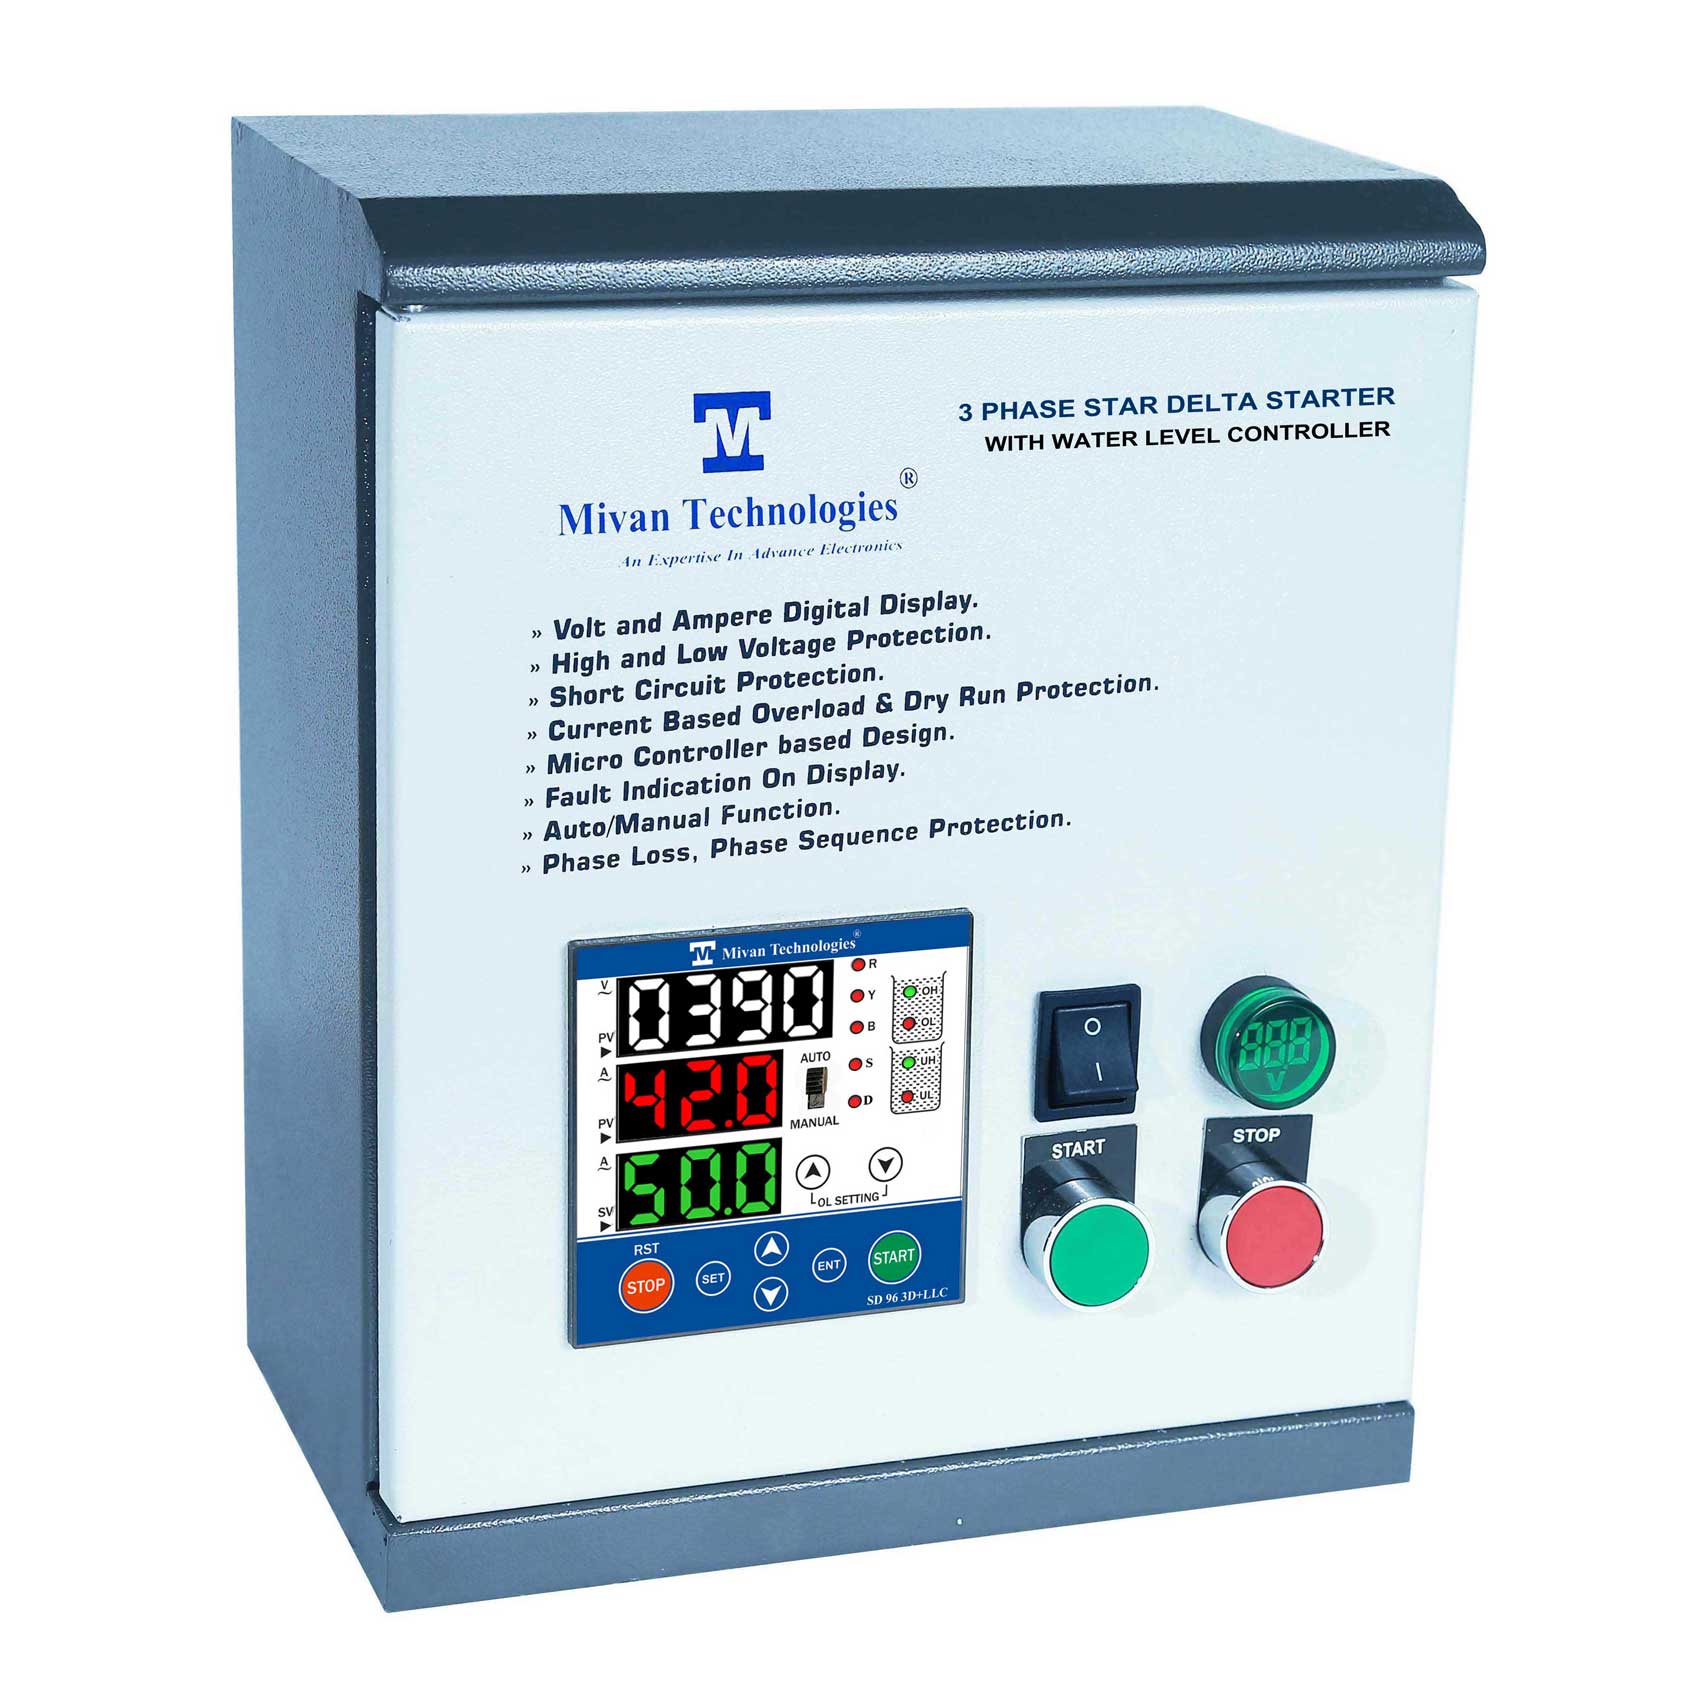 3 phase 3 display Heavy Duty water level controller with Star Delta motor starter with HV LV OL Dry protection with Auto switch spp and timer SD323225 for 15 HP motor